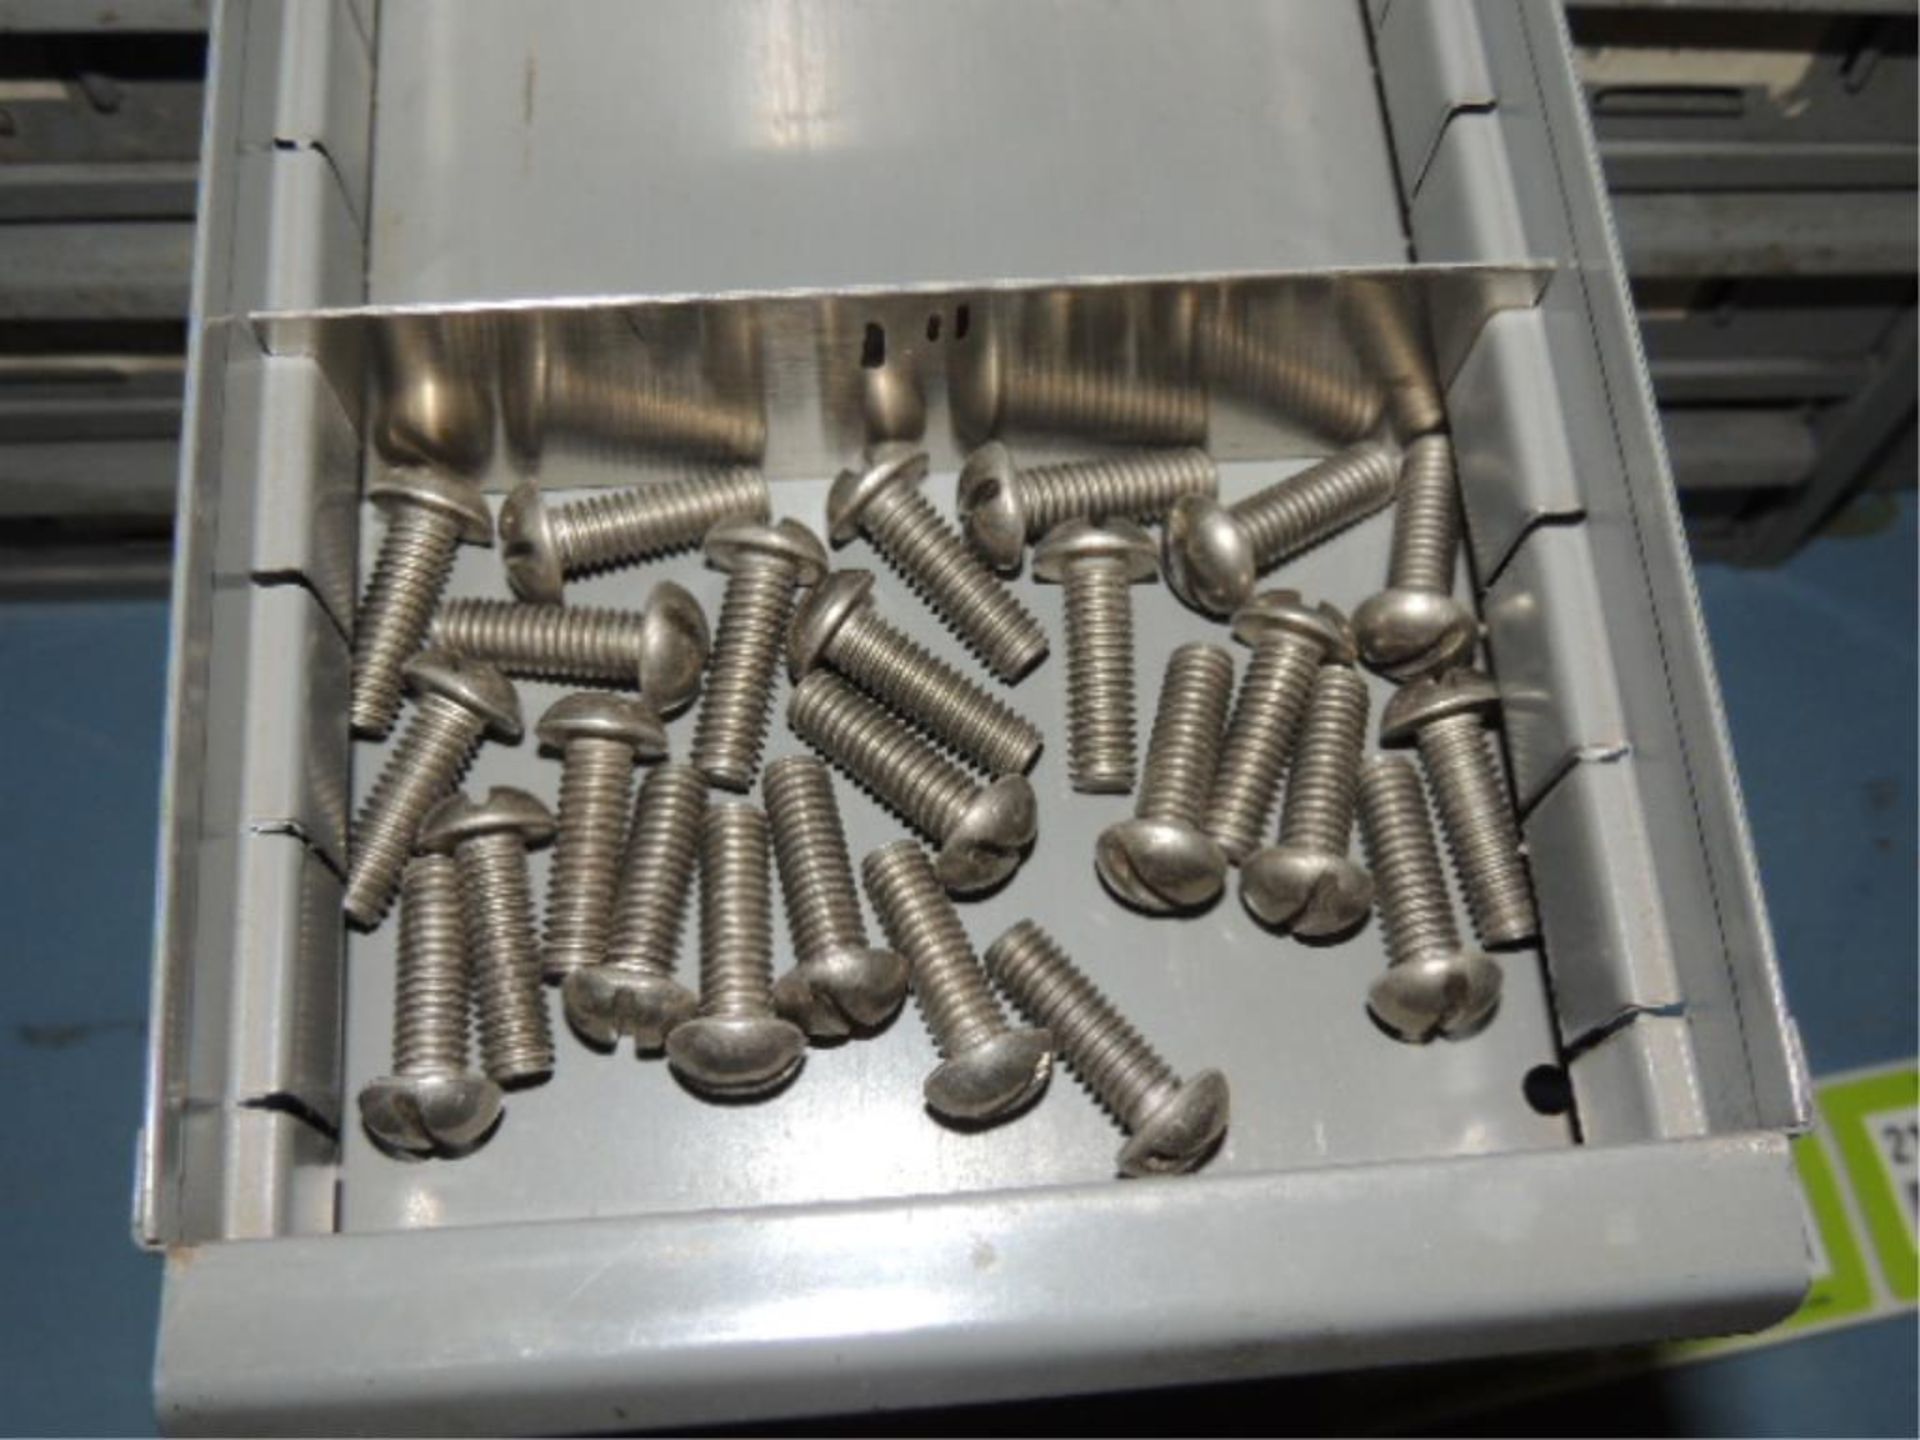 Bins; Lot: (8)parts bins w/ 18 bins each and contents, rivets, nuts, bolts, wing nuts, nipples, - Image 10 of 14